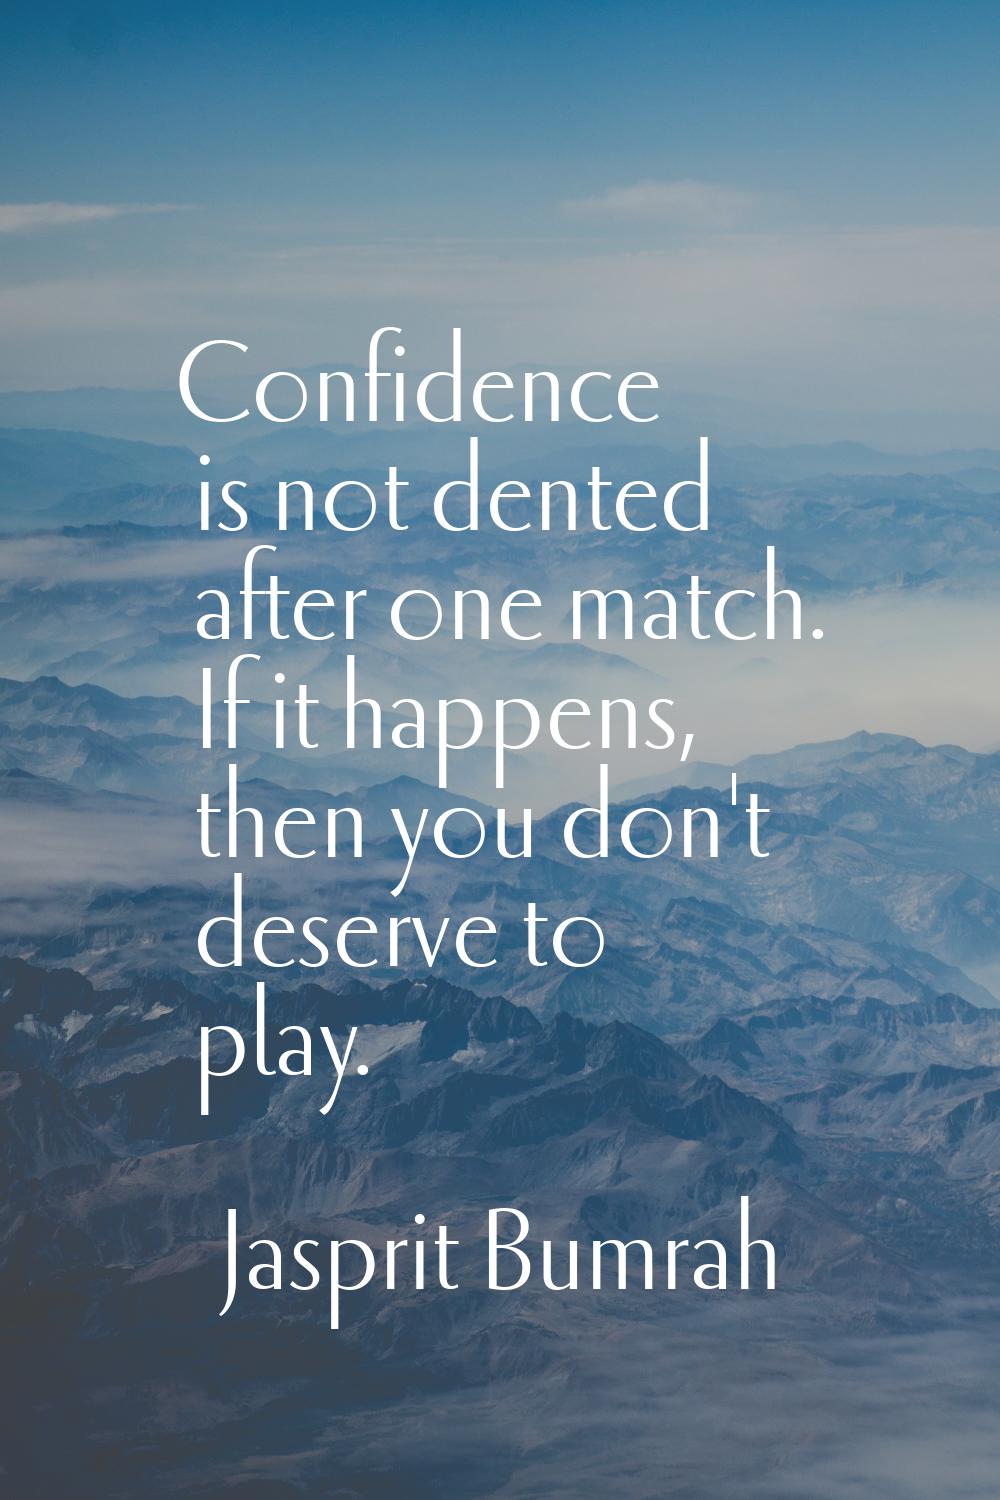 Confidence is not dented after one match. If it happens, then you don't deserve to play.